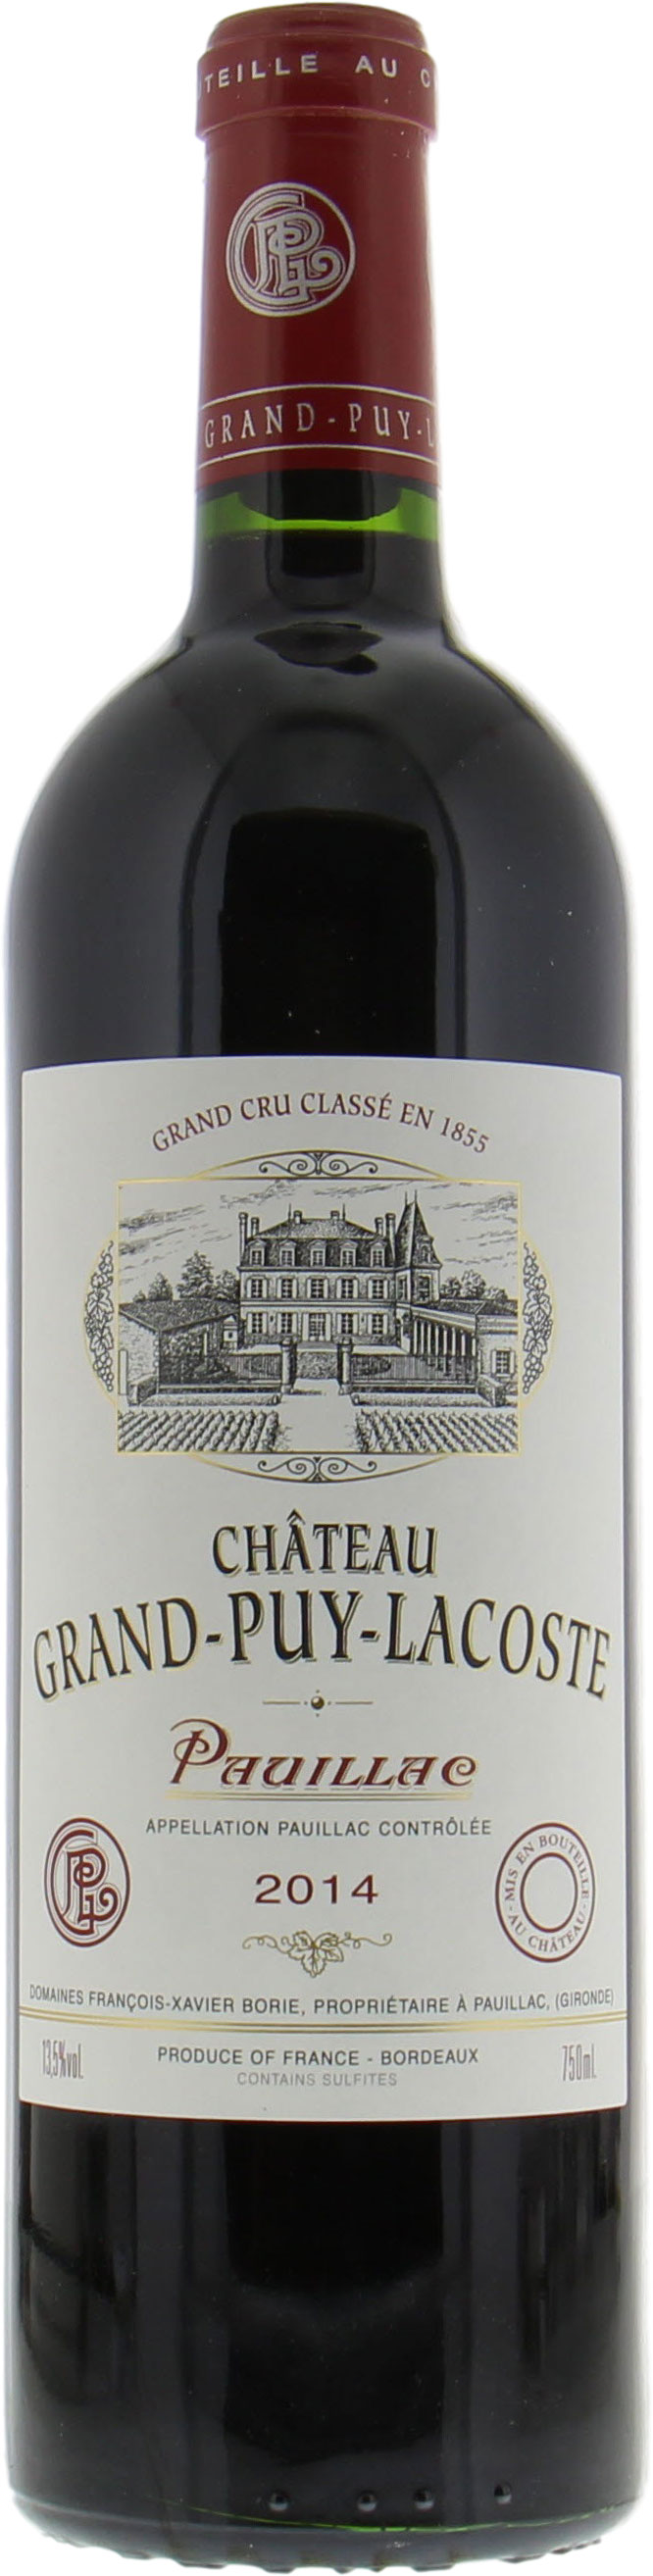 Chateau Grand Puy Lacoste - Chateau Grand Puy Lacoste 2014